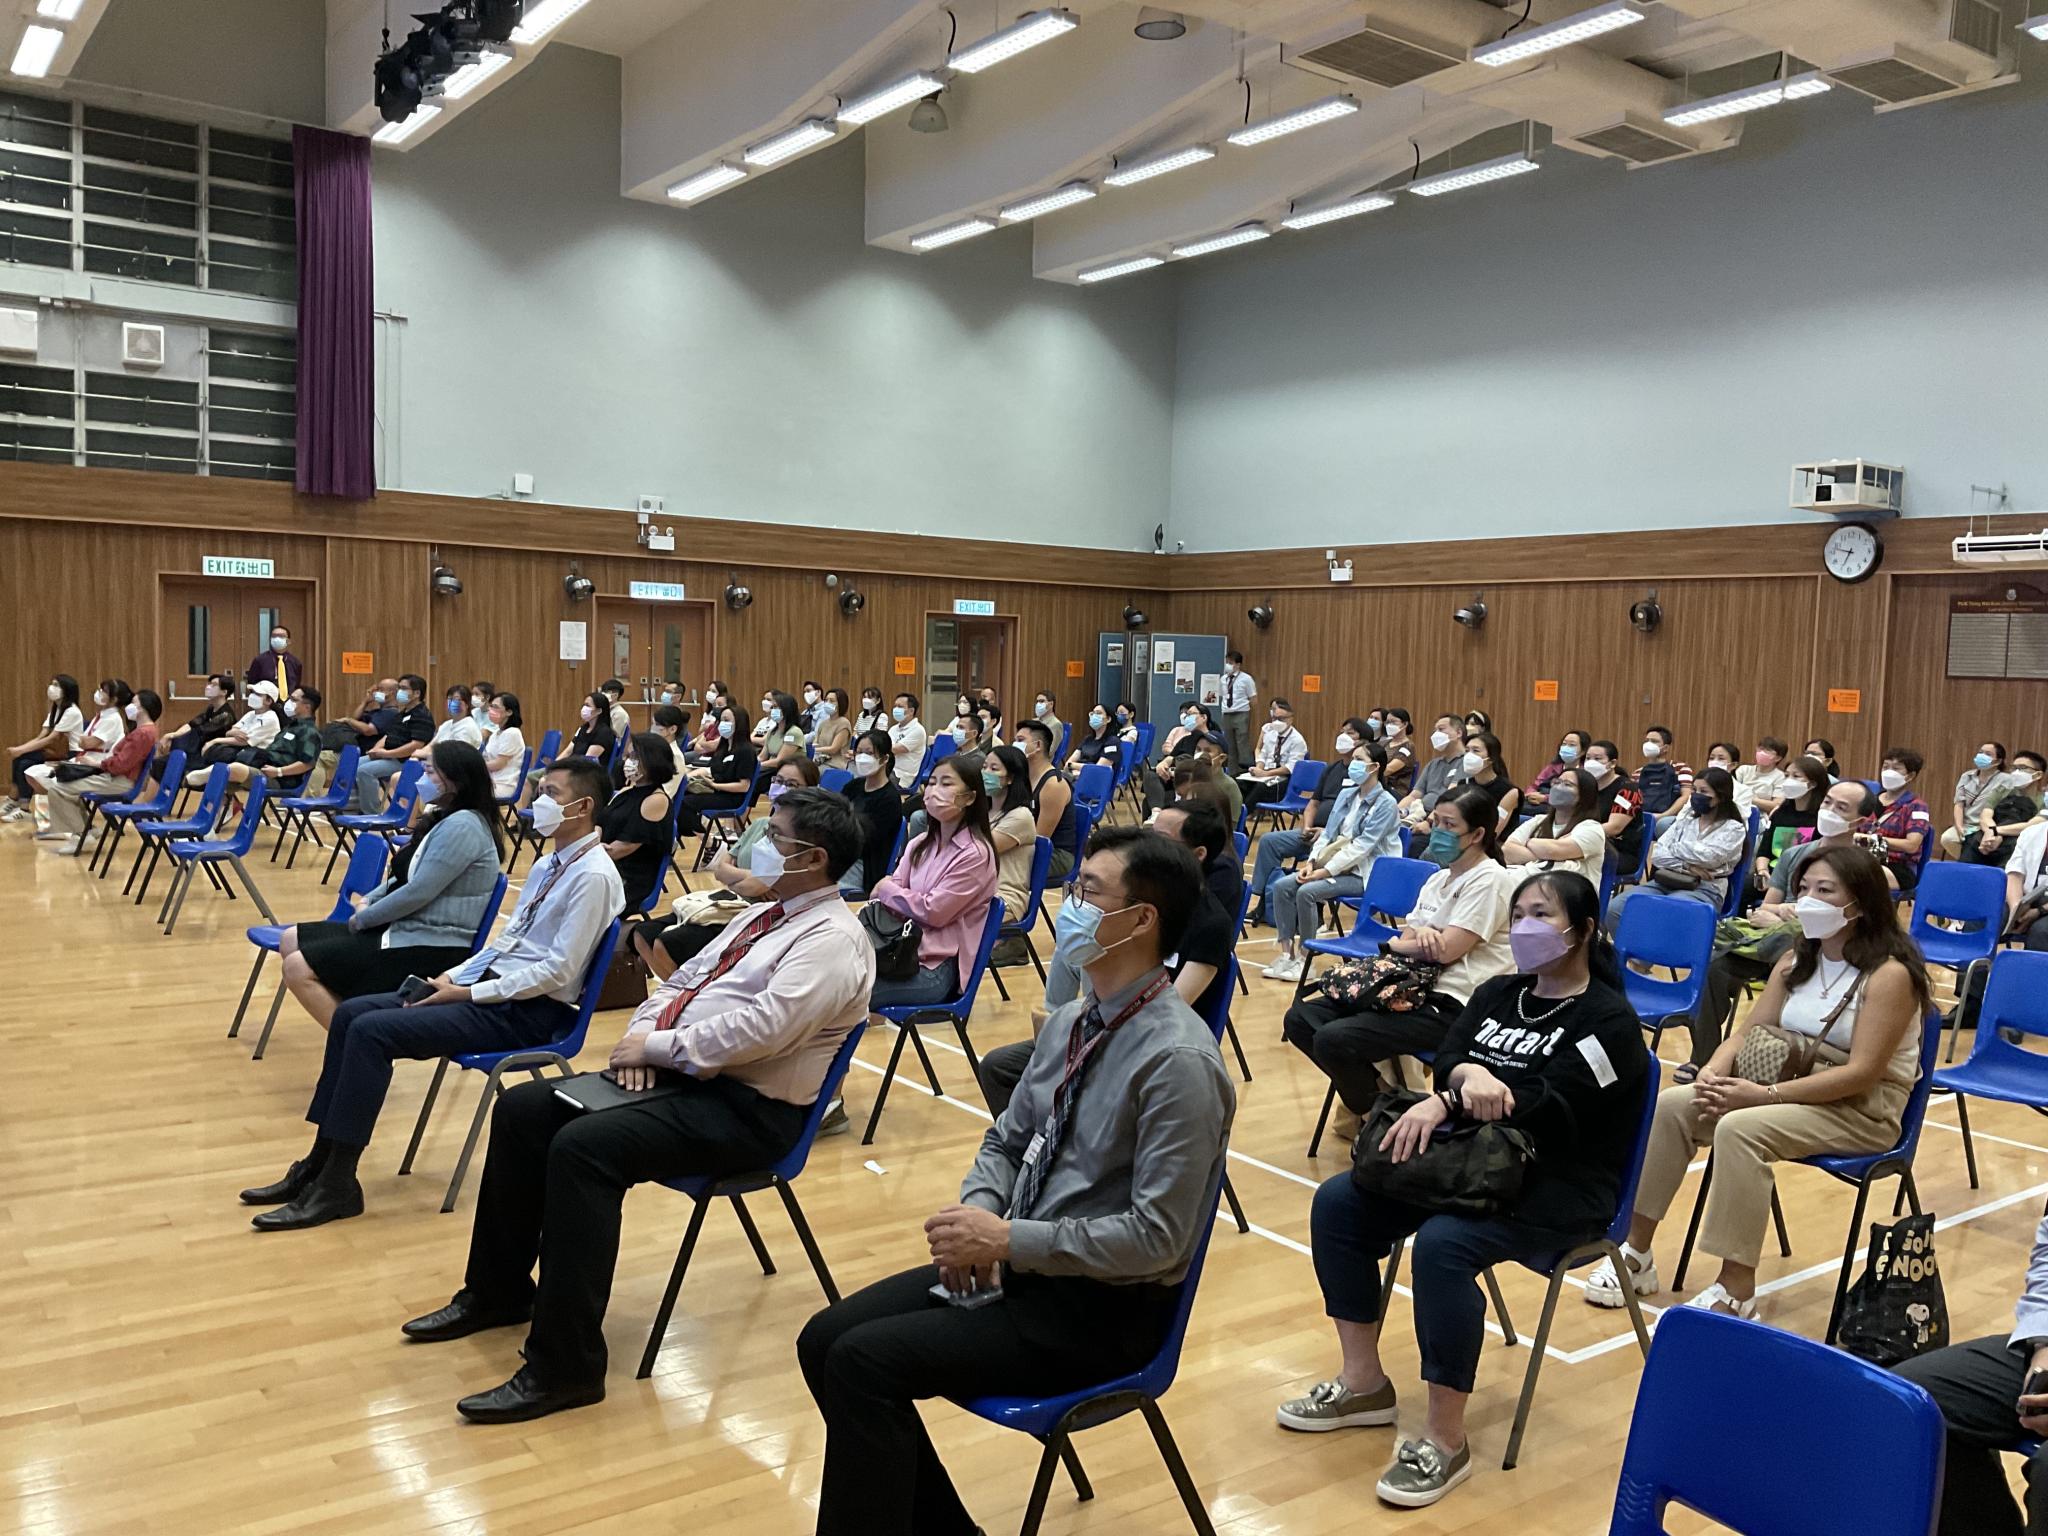 Many parents attended the Parents' Night.